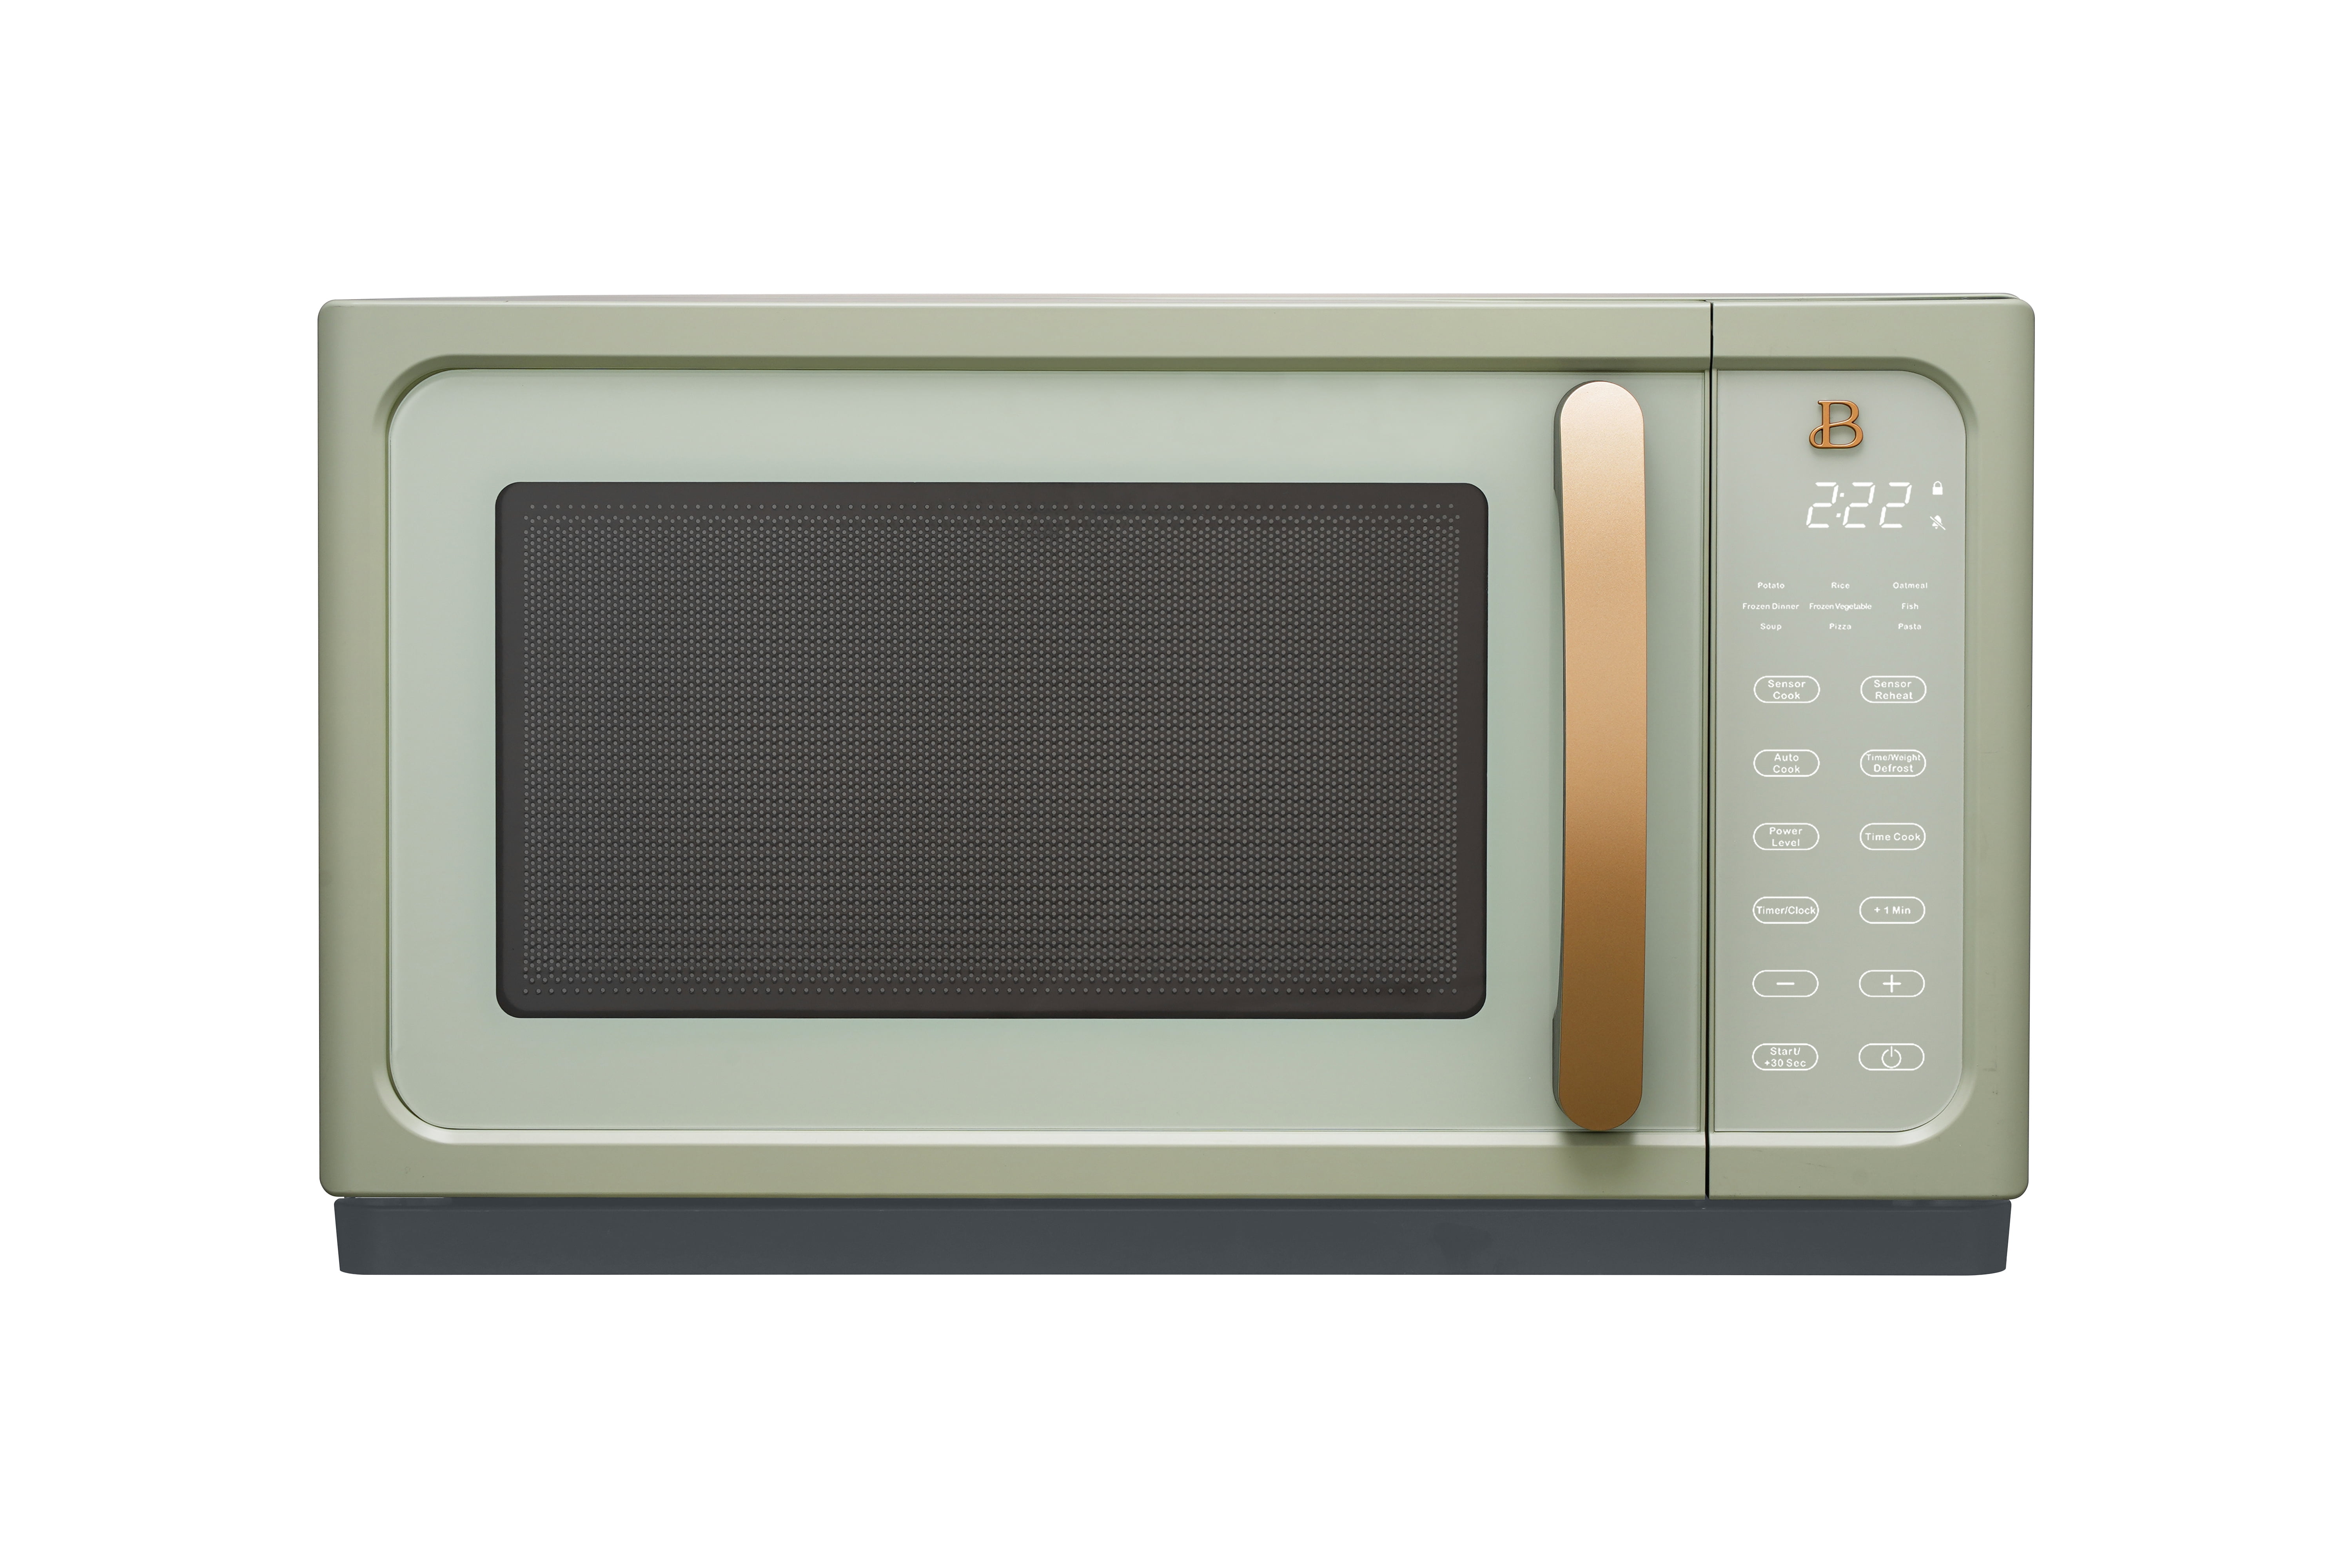 Comfee' Microwave Oven Pastel Green – Global